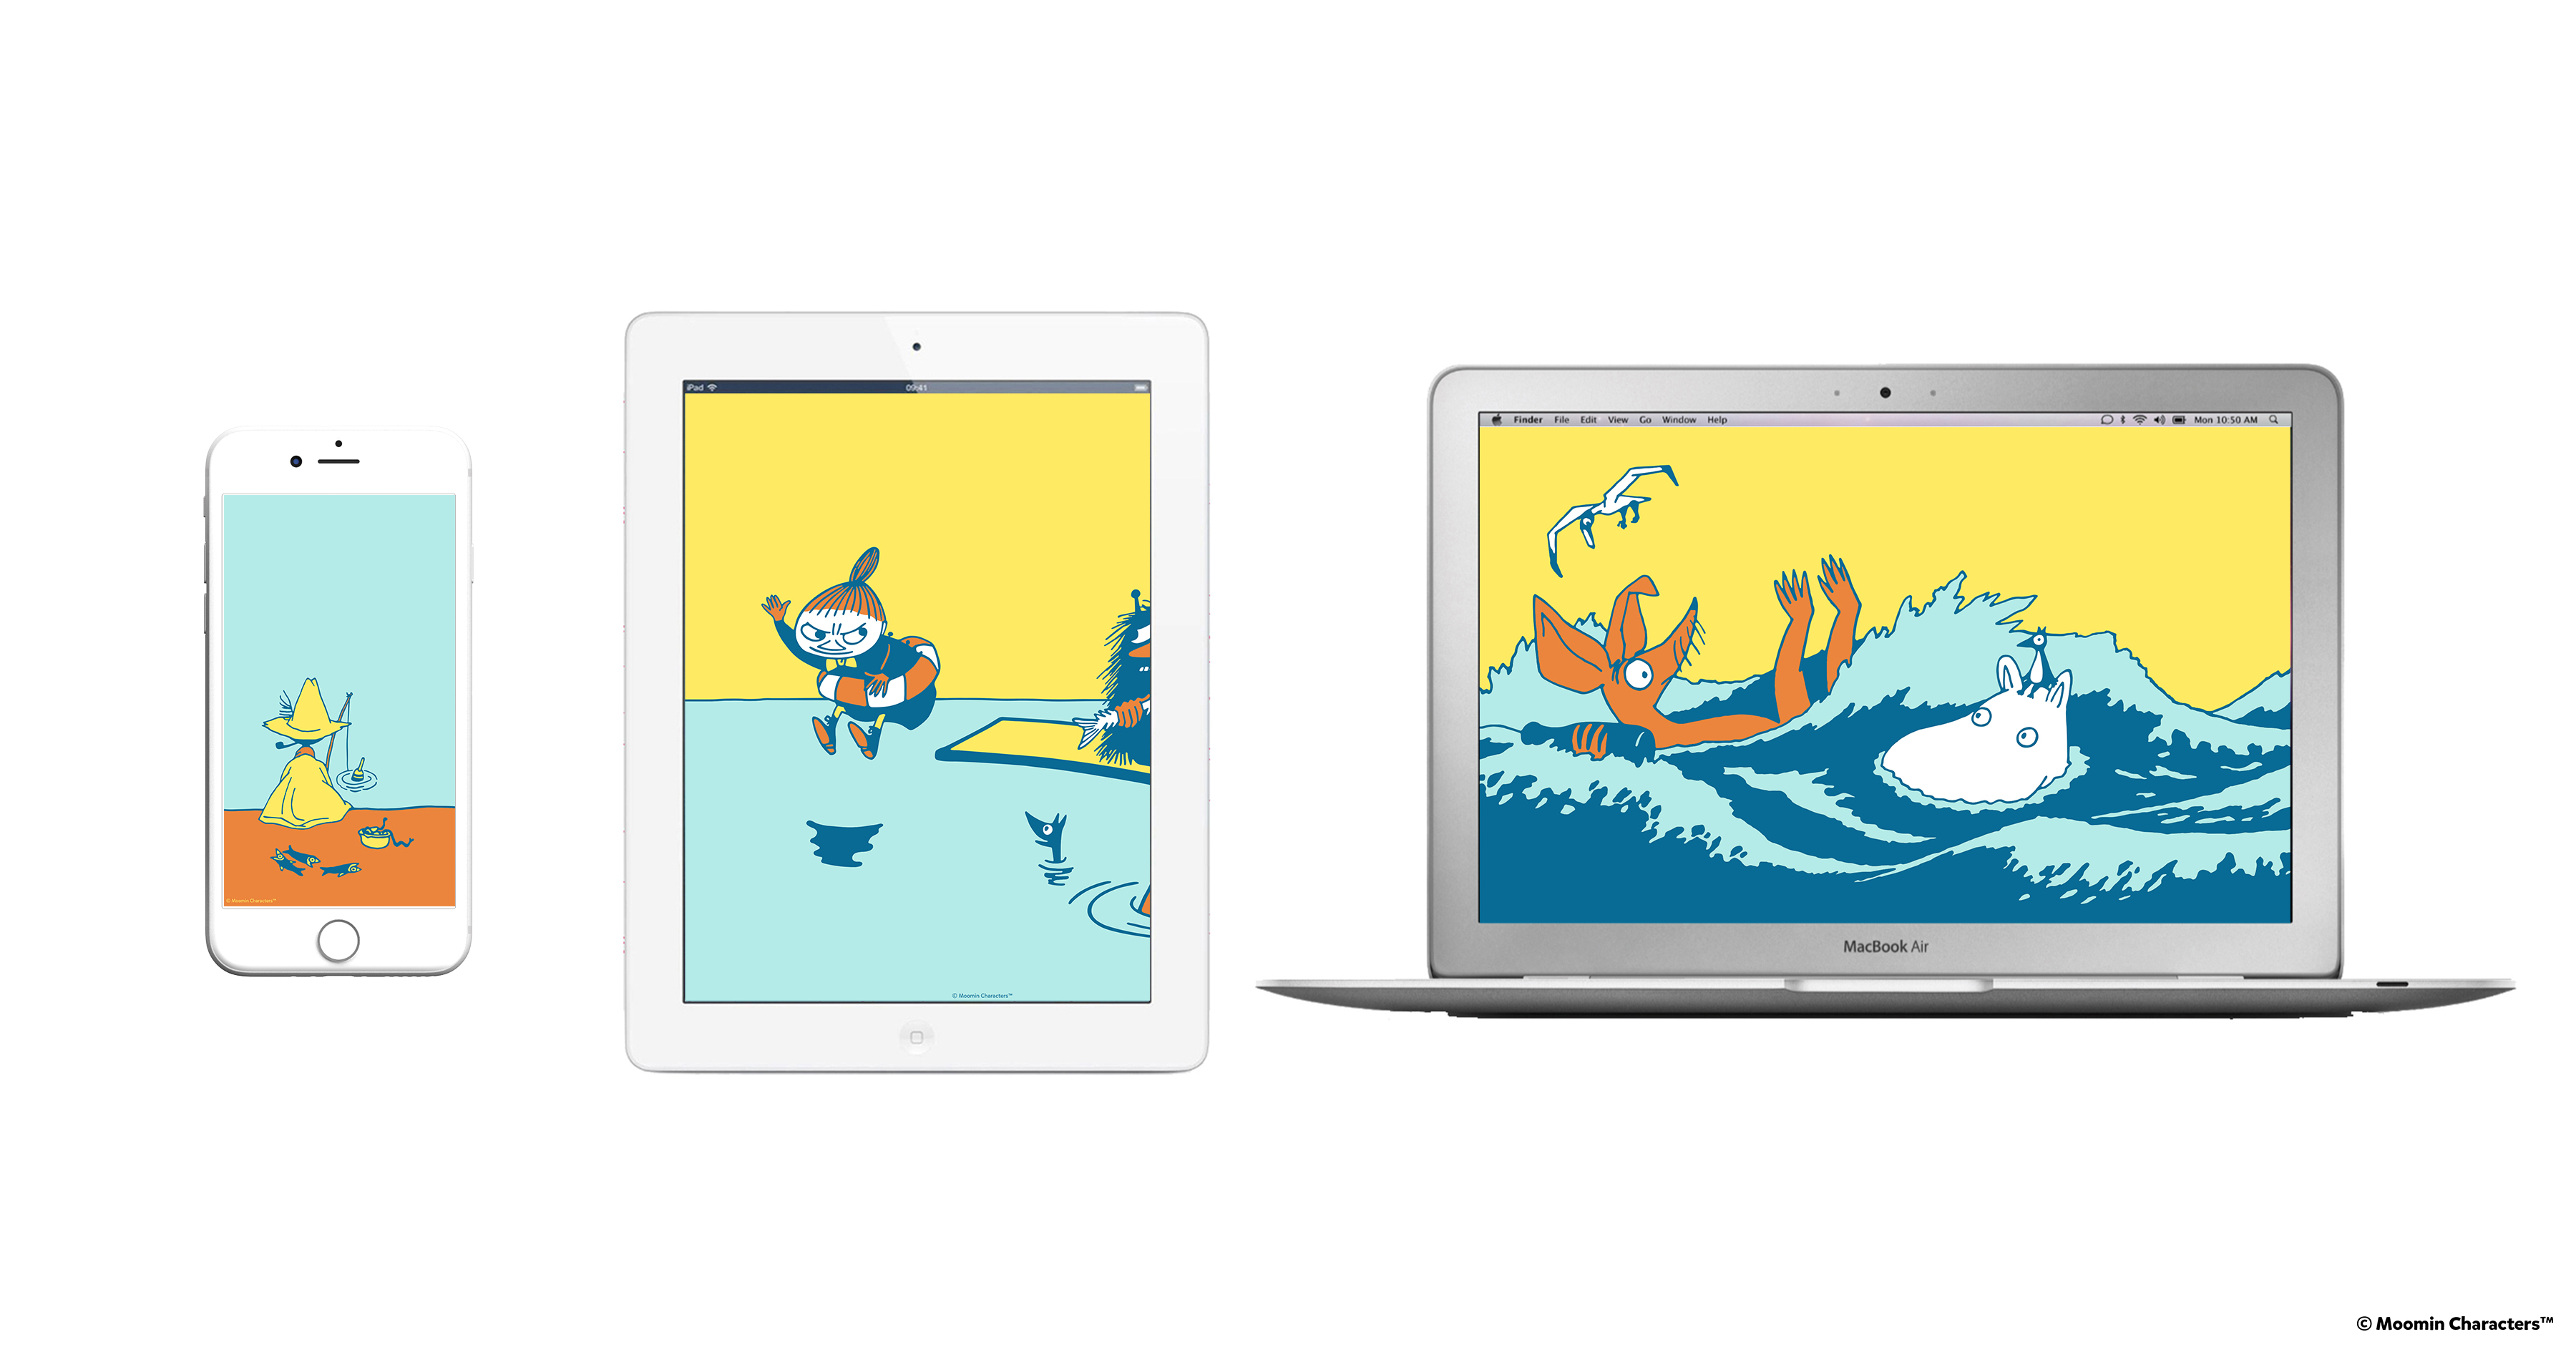 Show your support for #OURSEA with free Moomin wallpapers